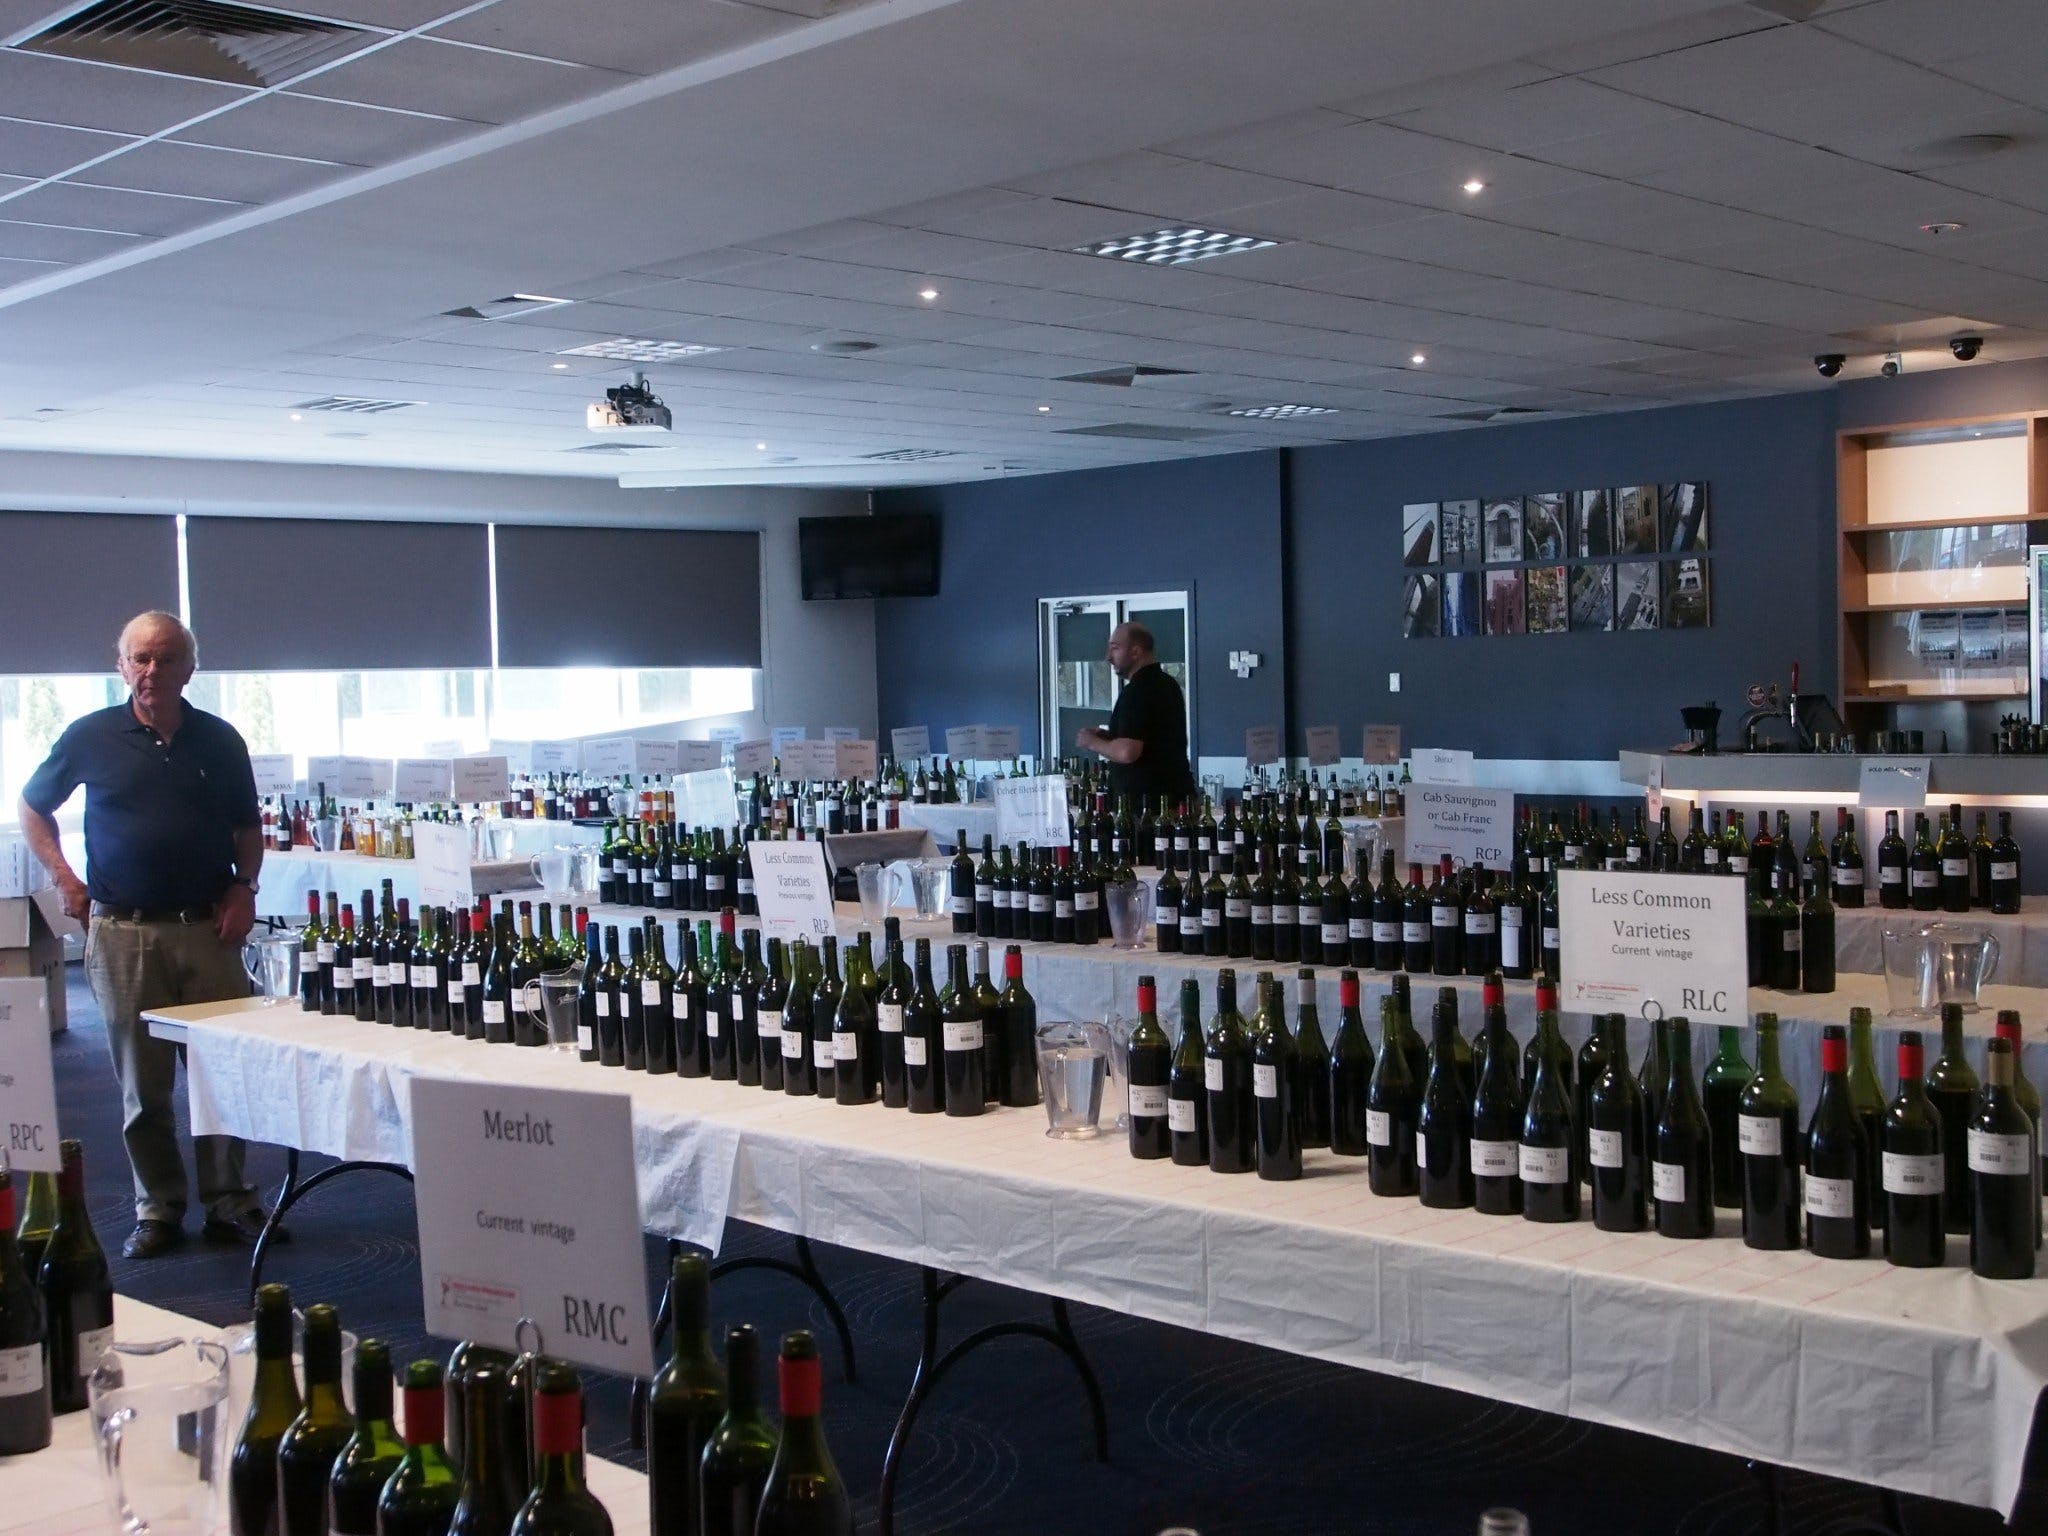 Eltham and District Wine Guild Annual Wine Show - 51st Annual Show - Casino Accommodation